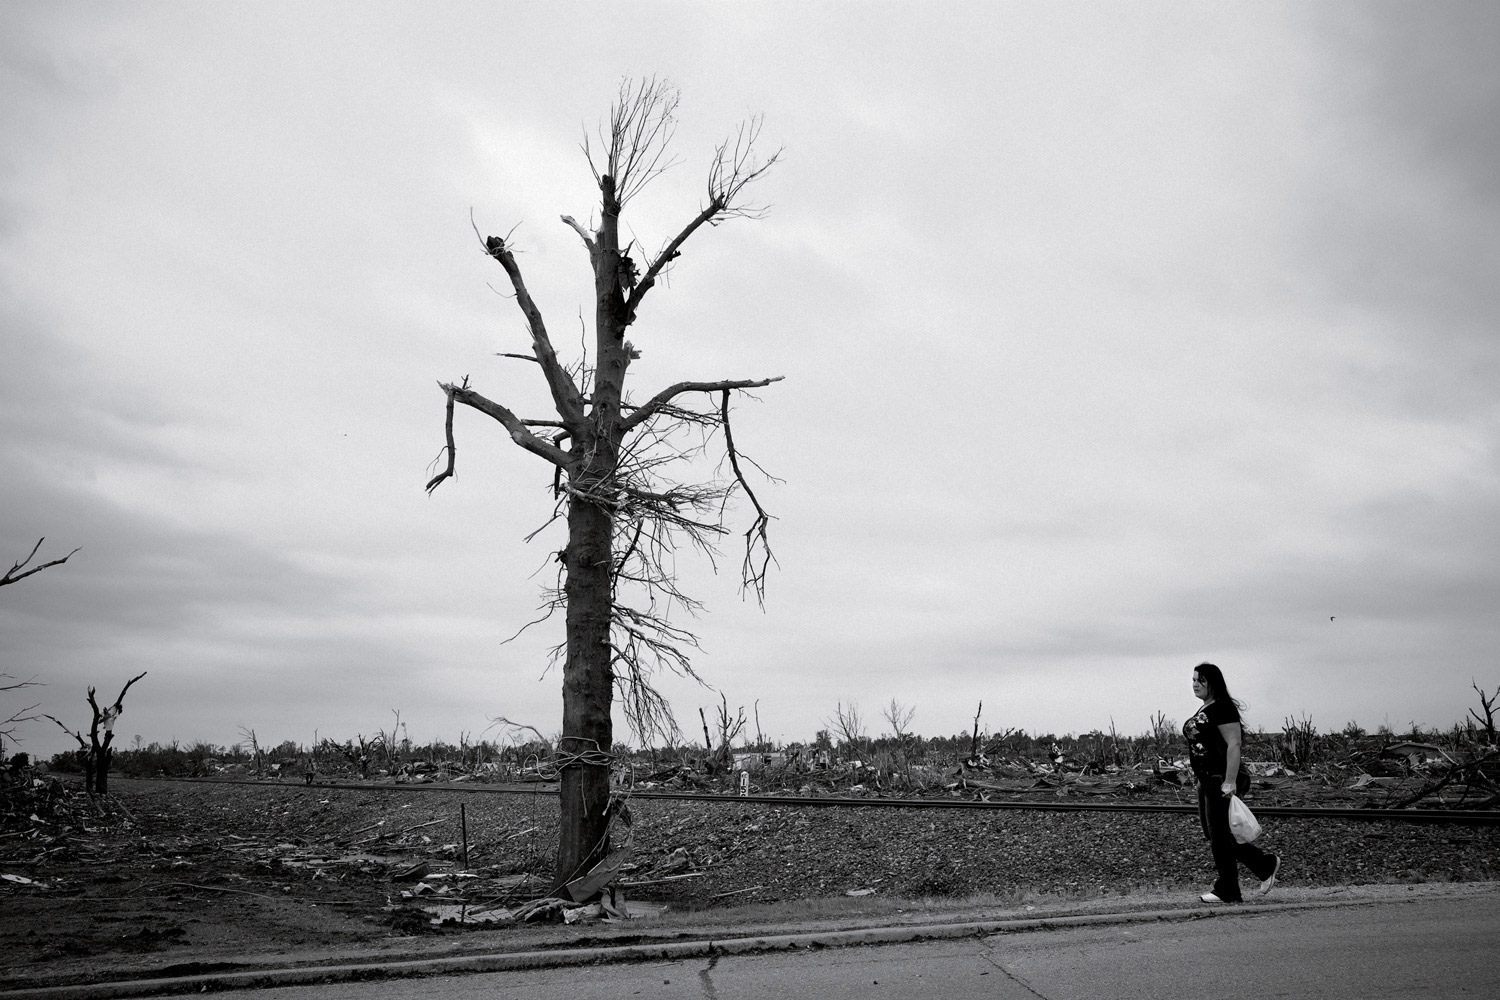 Edward Keating. From  Torn Asunder.  June 6, 2011 issue.
                              
                              Much of Joplin is unrecognizable since the tornado. A woman walks by the railroad tracks near 20th St. on May 24, 2011.